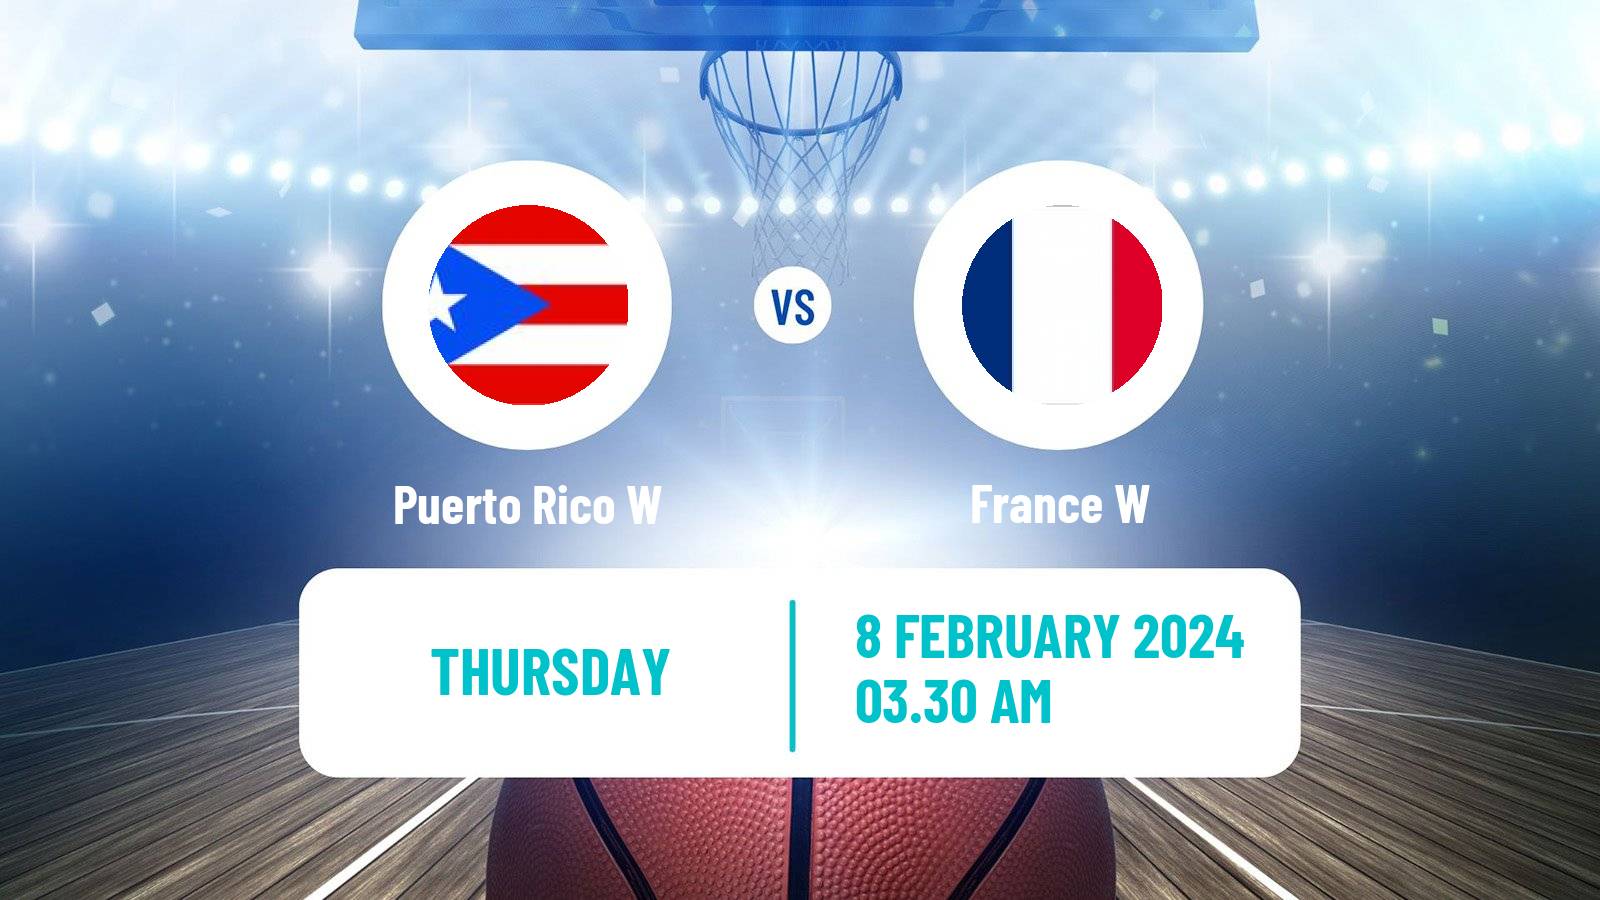 Basketball Olympic Games - Basketball Women Puerto Rico W - France W